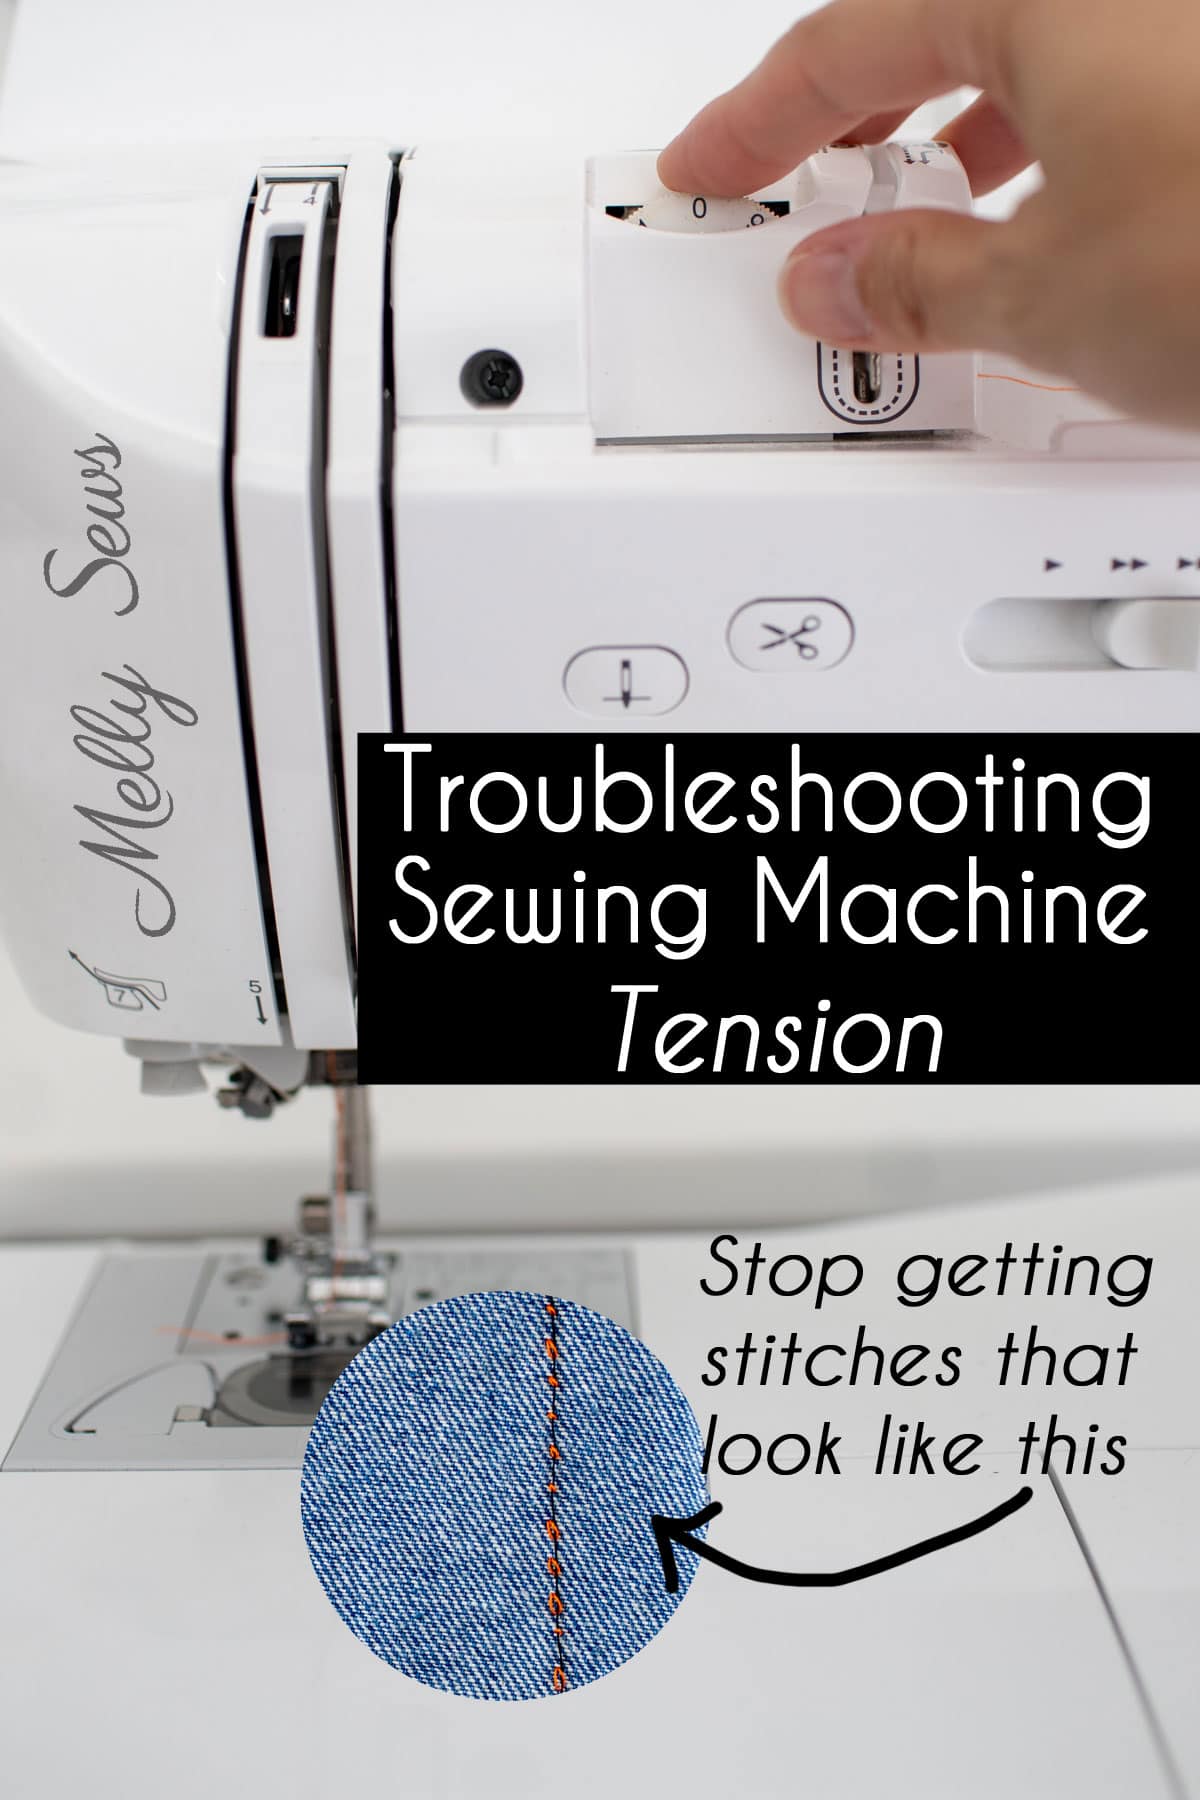 Pros and Cons of Tension Settings